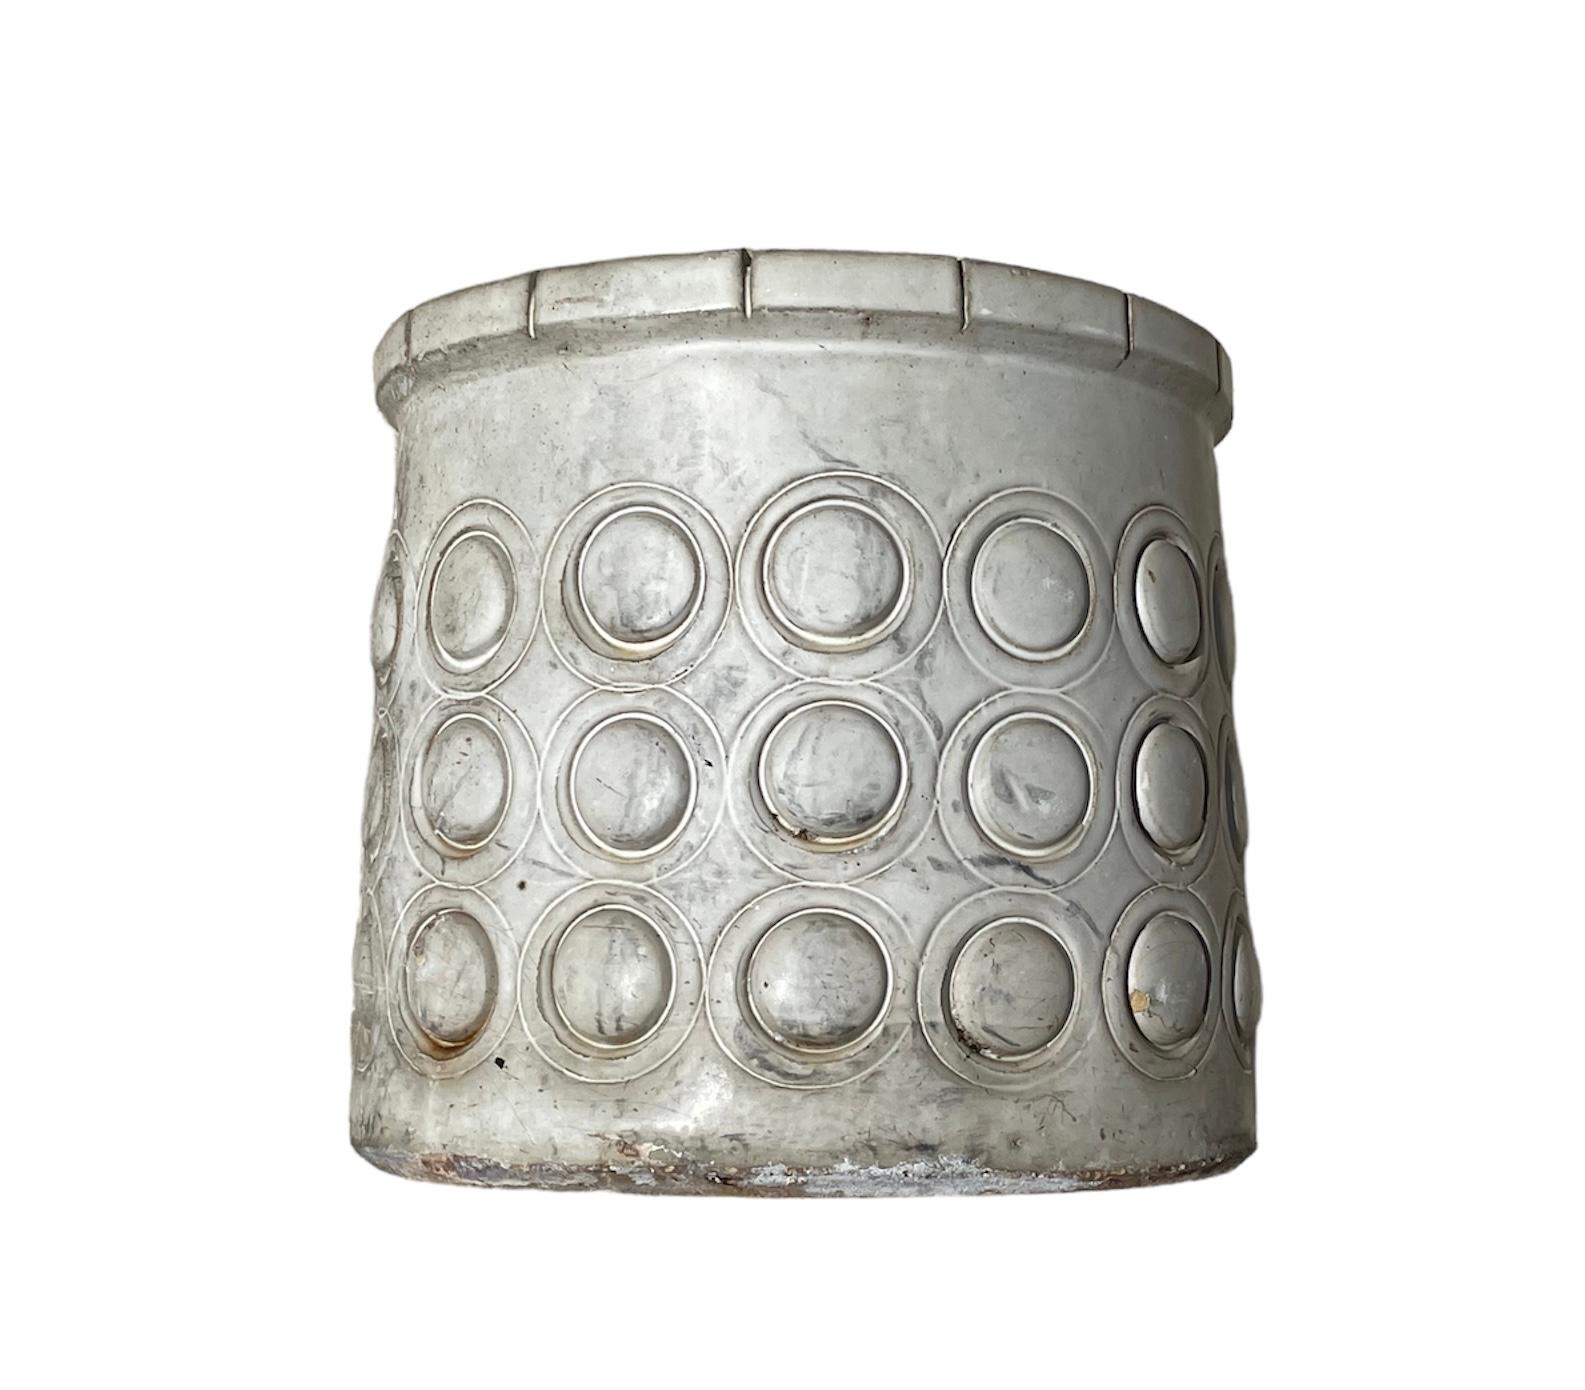 This is an Isla Del Sol Puerto Rican Stoneware Planter. It depicts a heavy round planter painted light grey pearly color and decorated with three rows of convex hemispheres. The upper border is decorated with rectangles.